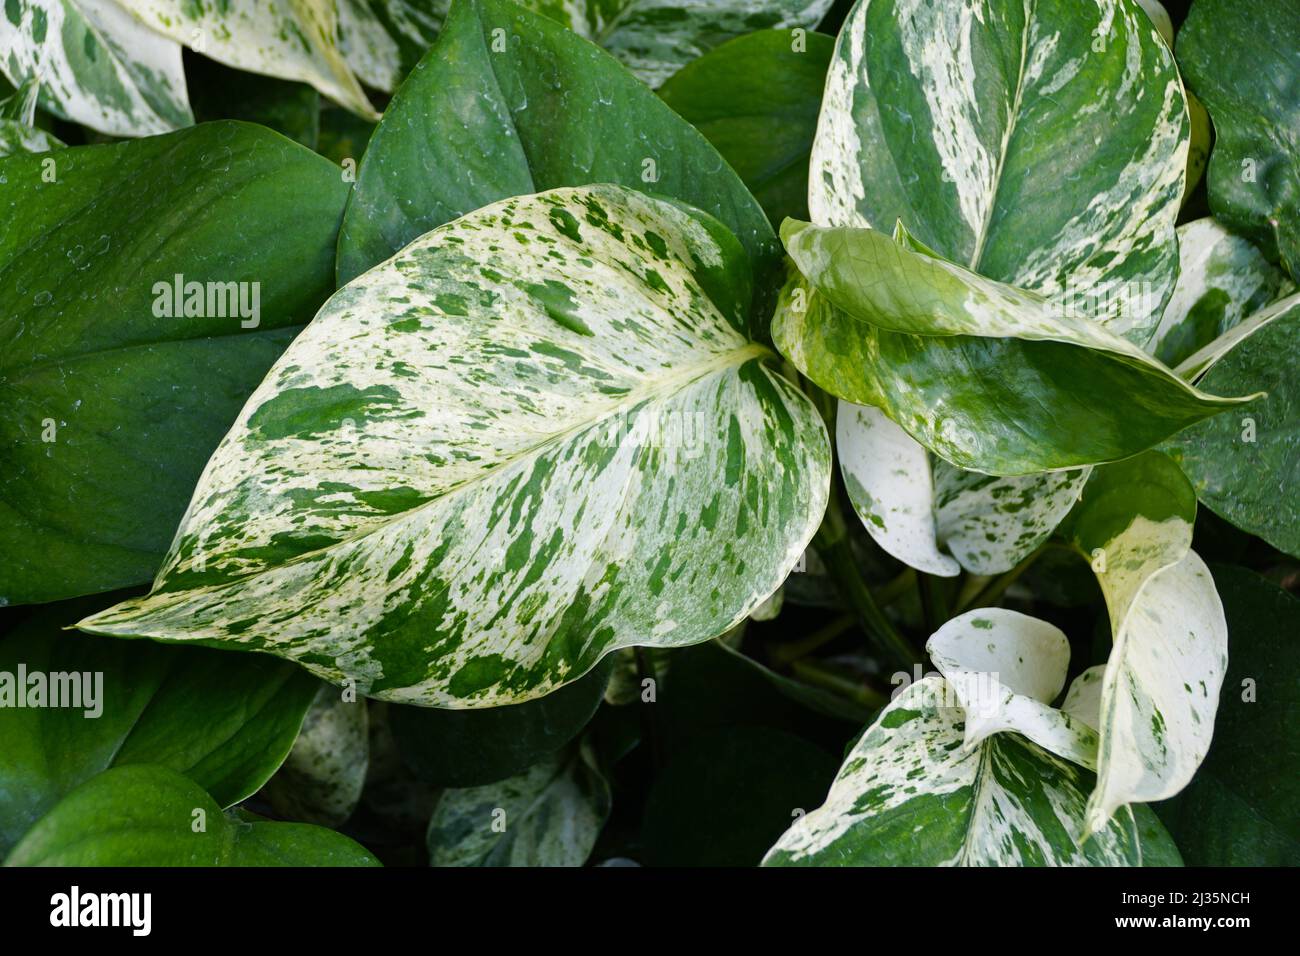 The white and green variegated leaves of Marble Queen Pothos Stock Photo